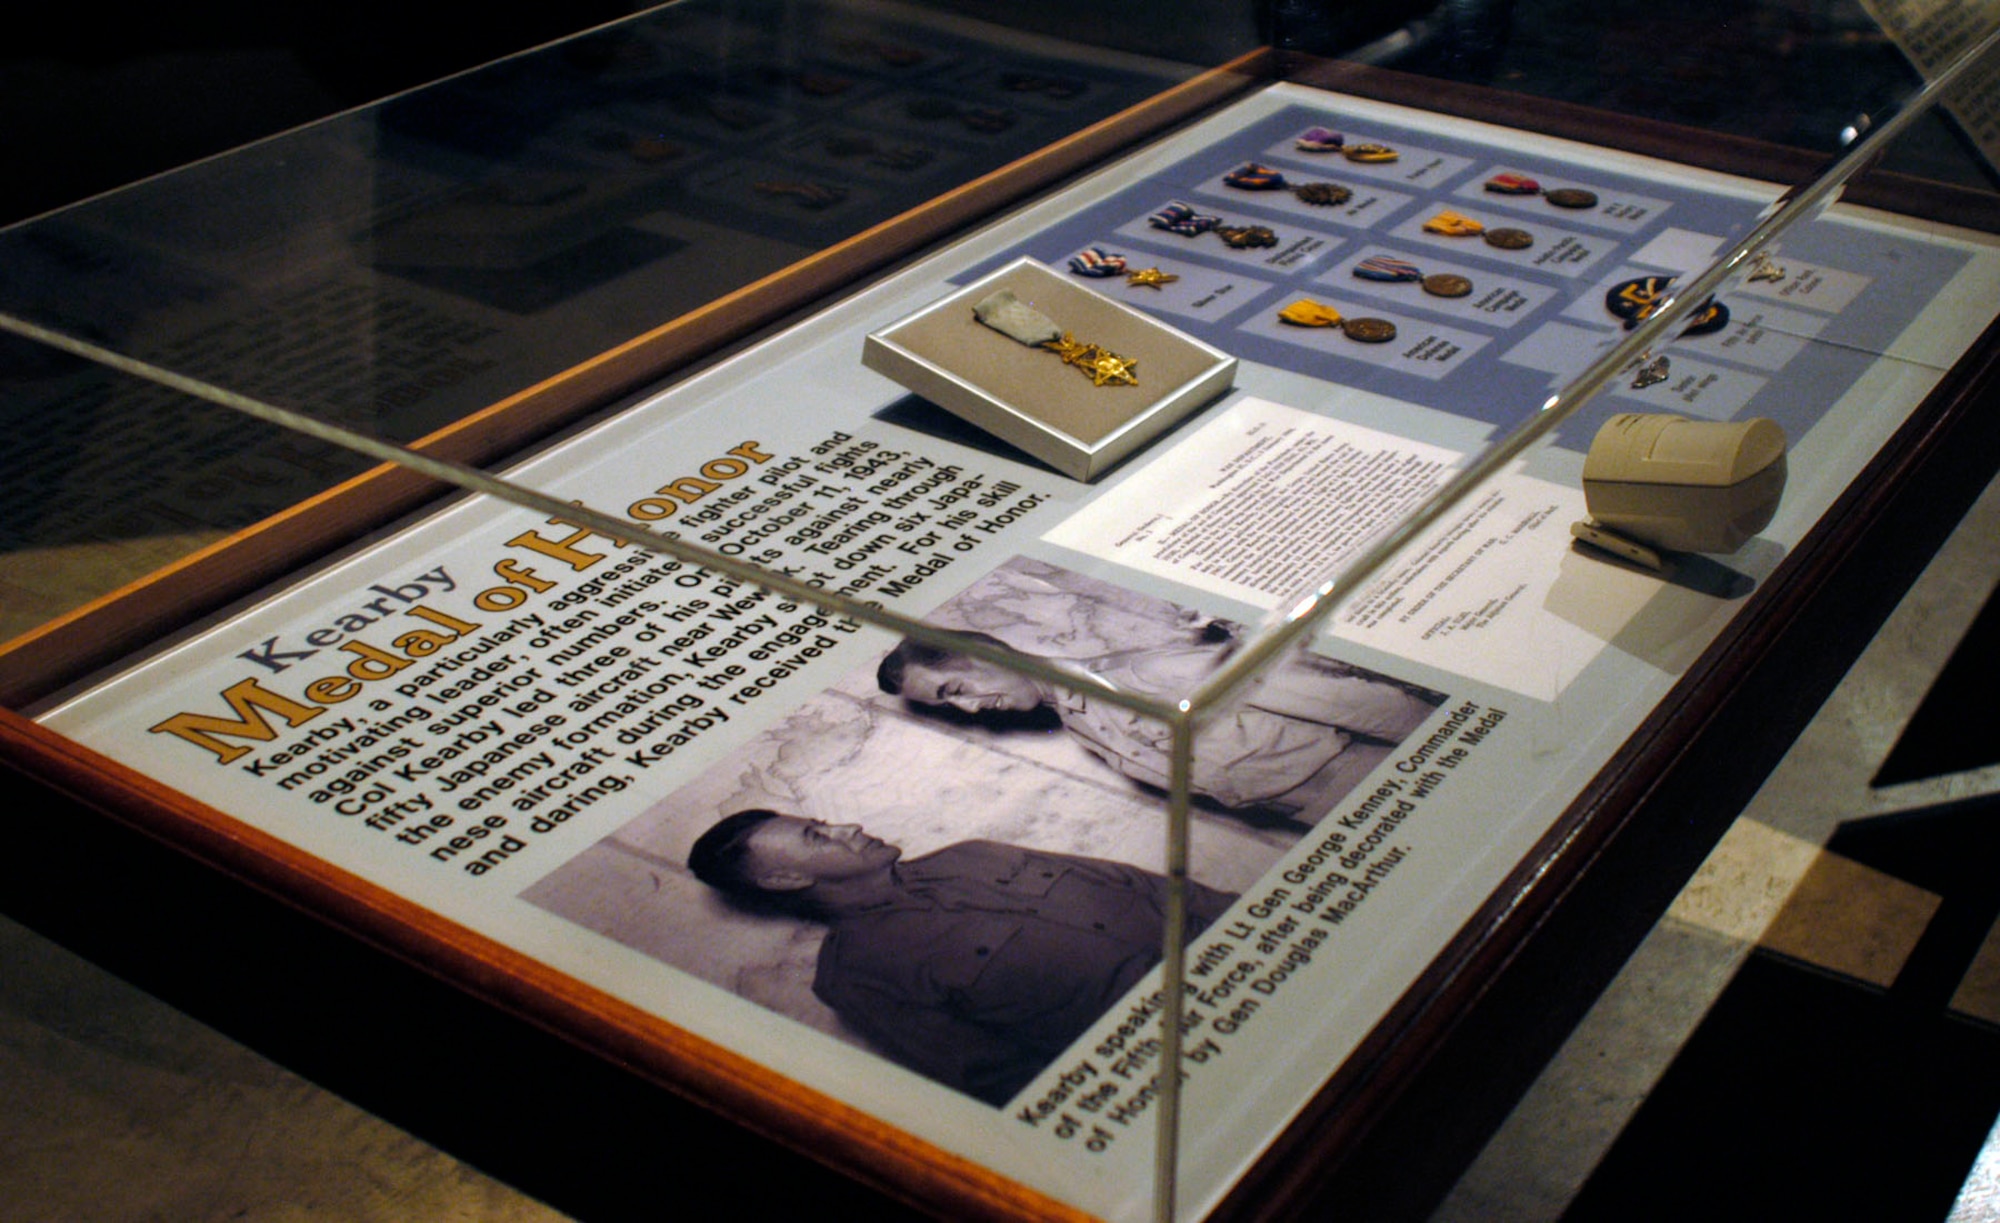 DAYTON, Ohio -- Col. Neel E. Kearby Medal of Honor on display in the World War II Gallery at the National Museum of the U.S. Air Force. (U.S. Air Force photo)